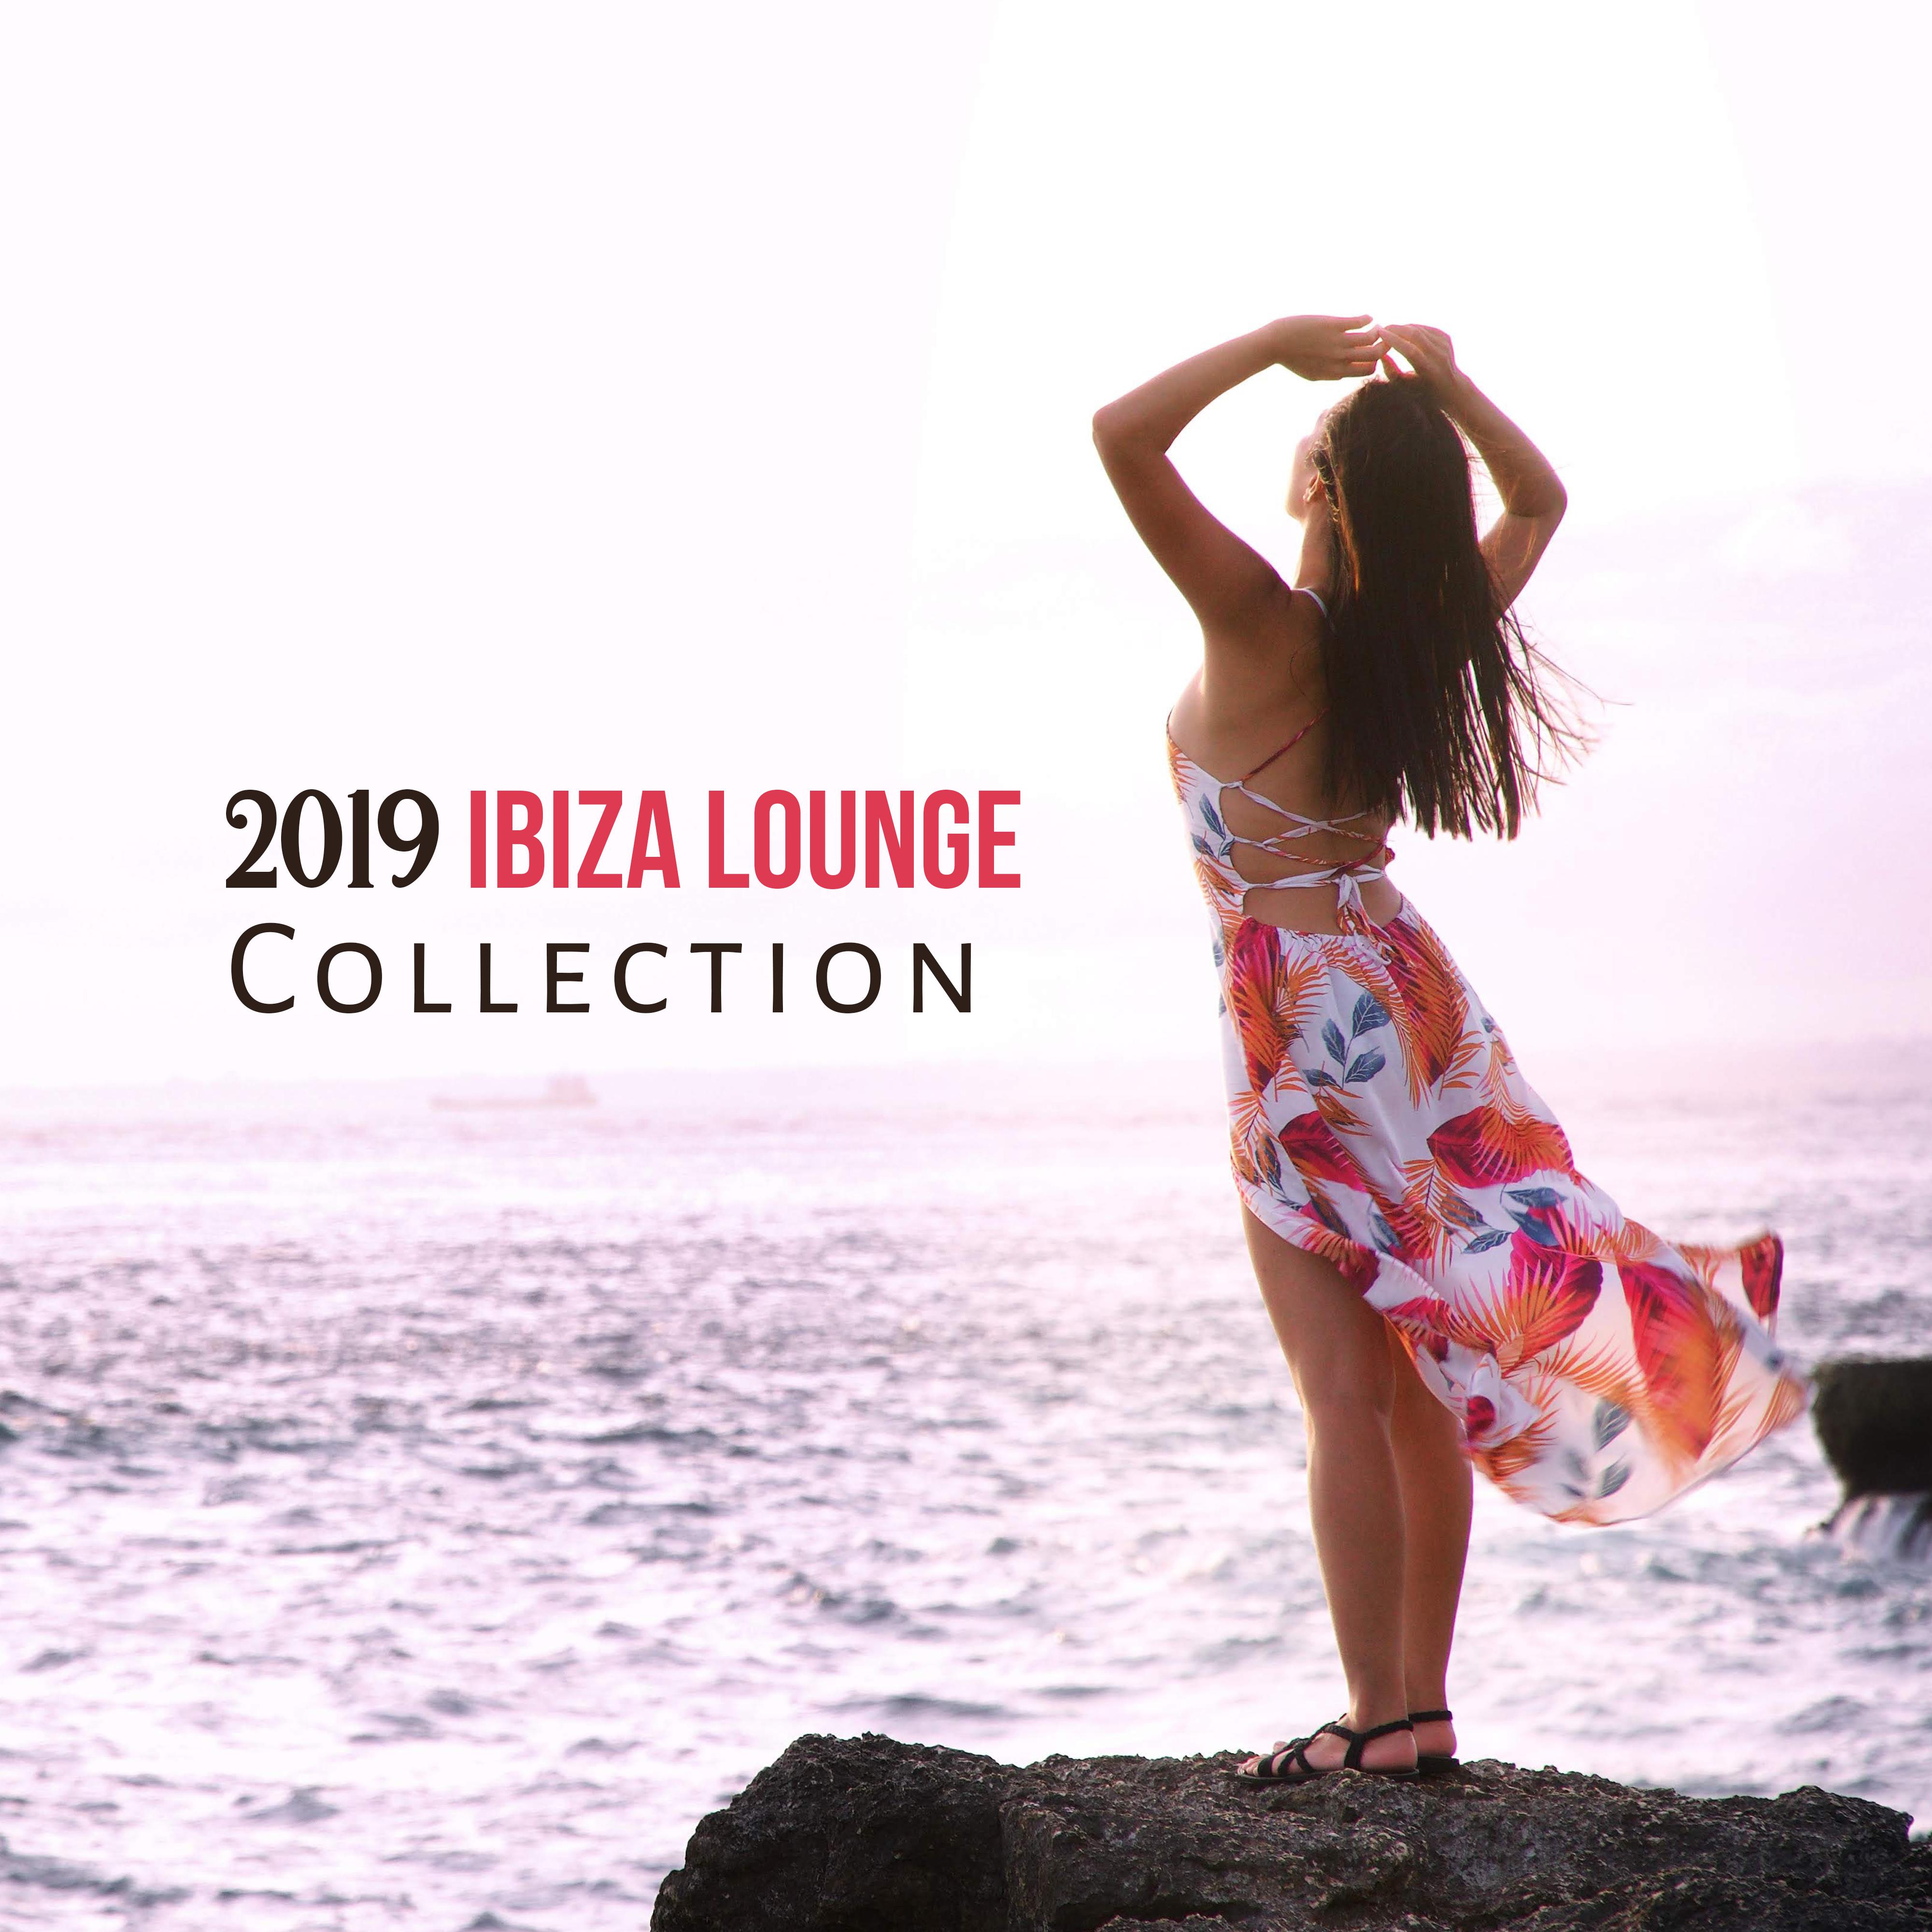 2019 Ibiza Lounge Collection: Chilled Ibiza Vibes, Modern Chill Out 2019, Chillout Lounge Hits 2019, Zen, Summer Music, Ambient Chill, Beach Music